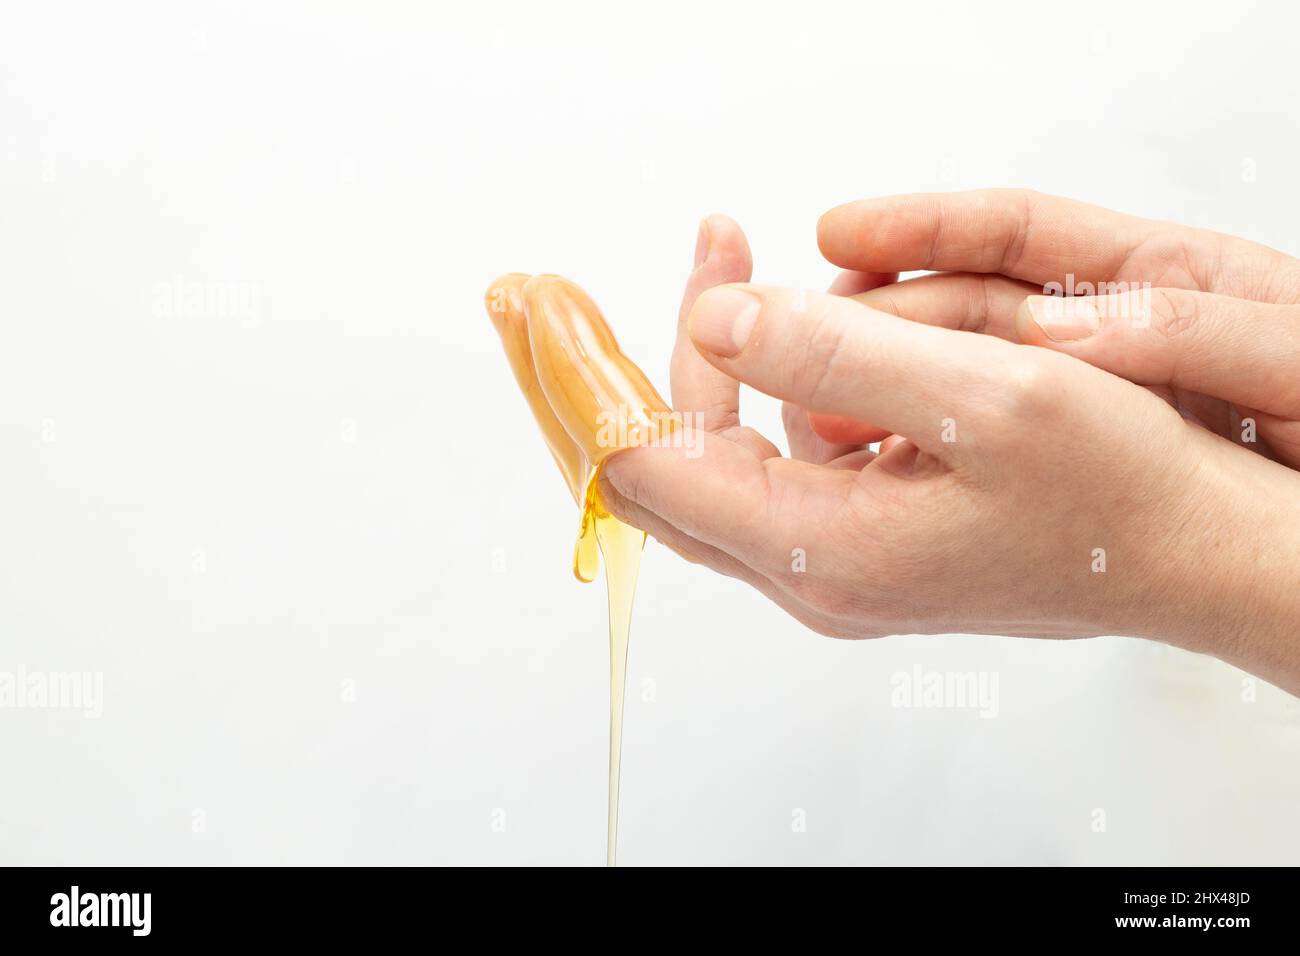 Woman's hands applying dripping honey on dried skin Stock Photo